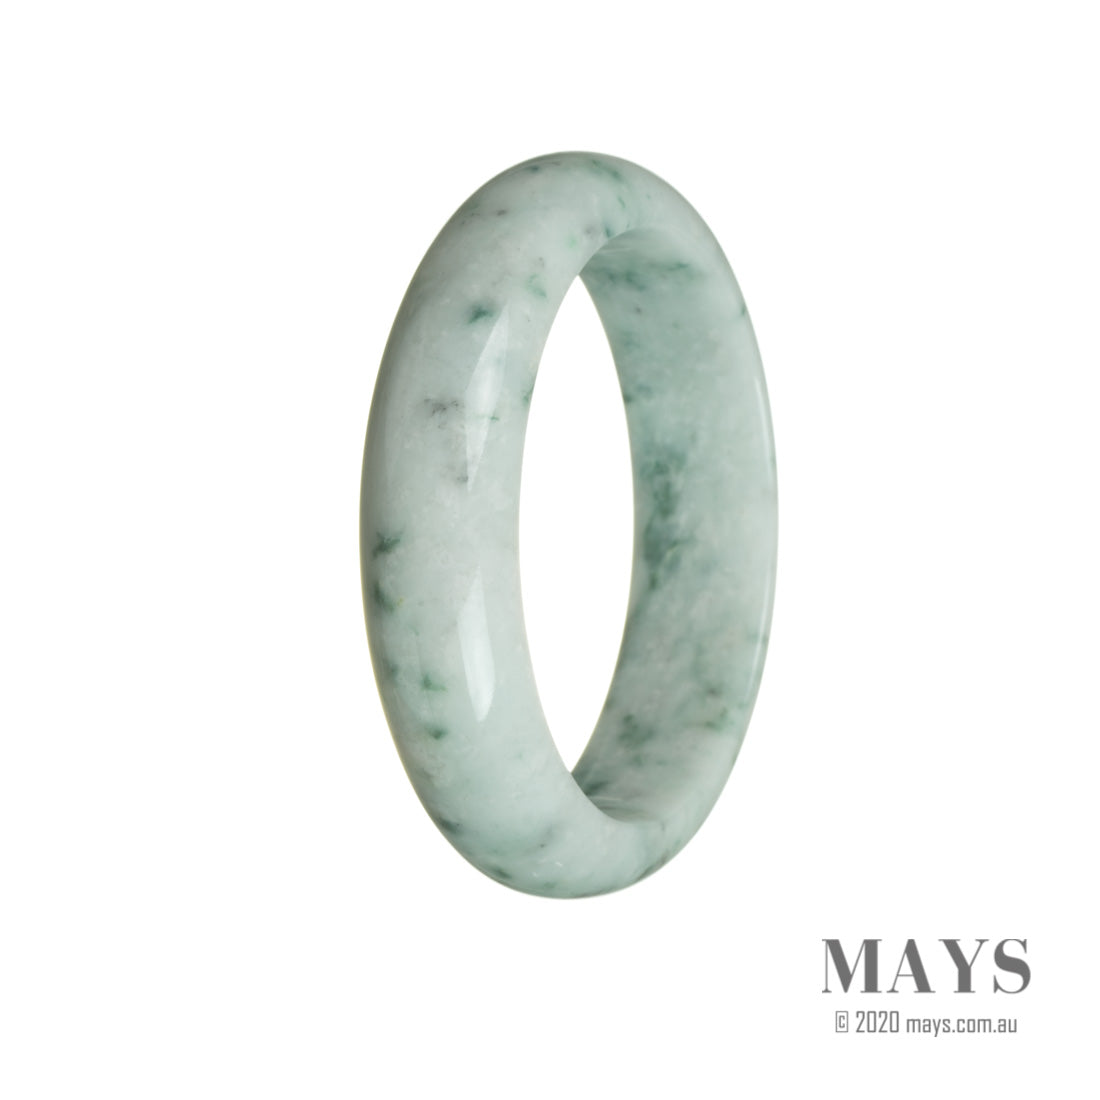 A close-up image of a half-moon shaped white Burmese jade bangle, measuring 59mm in diameter. The bangle appears smooth and polished, showcasing the natural beauty of the untreated jade.